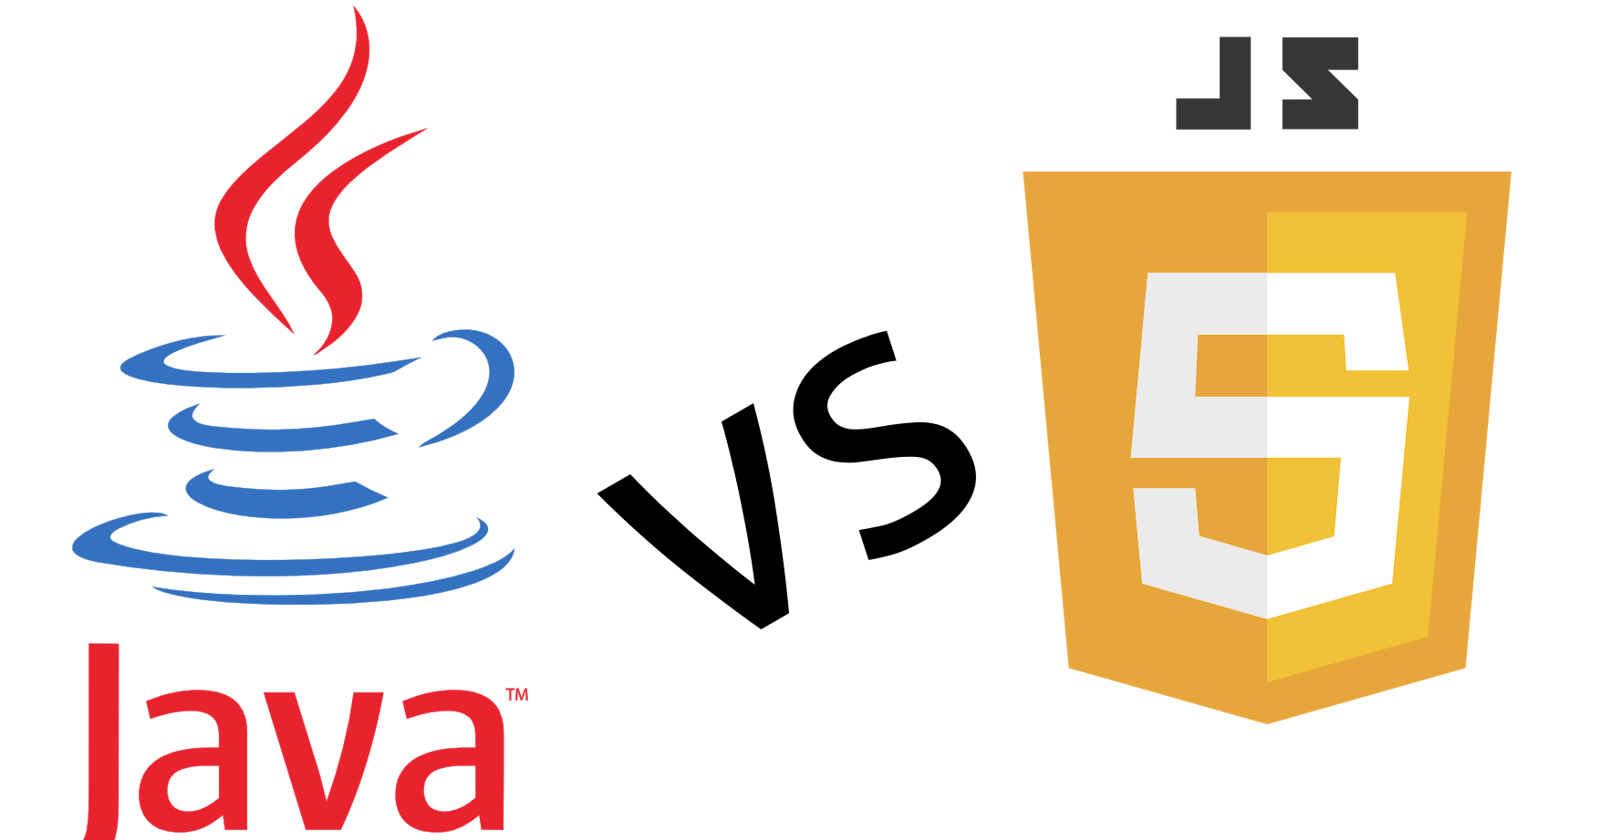 JAVA VS JAVASCRIPT
THE KEY DIFFERENCE BETWEEN THIS PROGRAMMING LANGUAGE